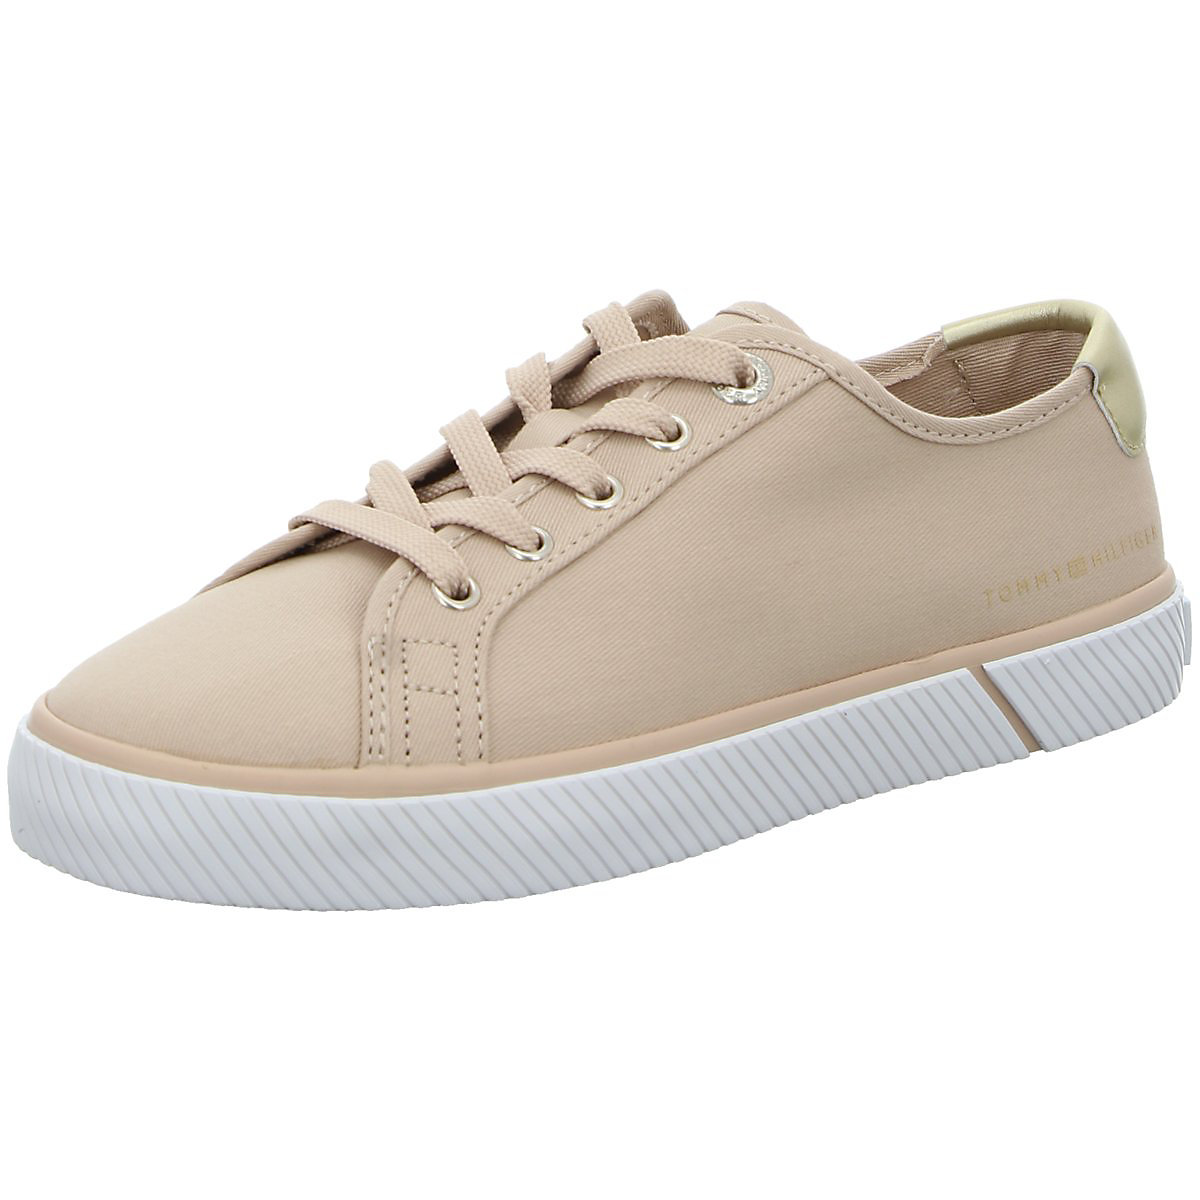 TOMMY HILFIGER Sneakers Low creme